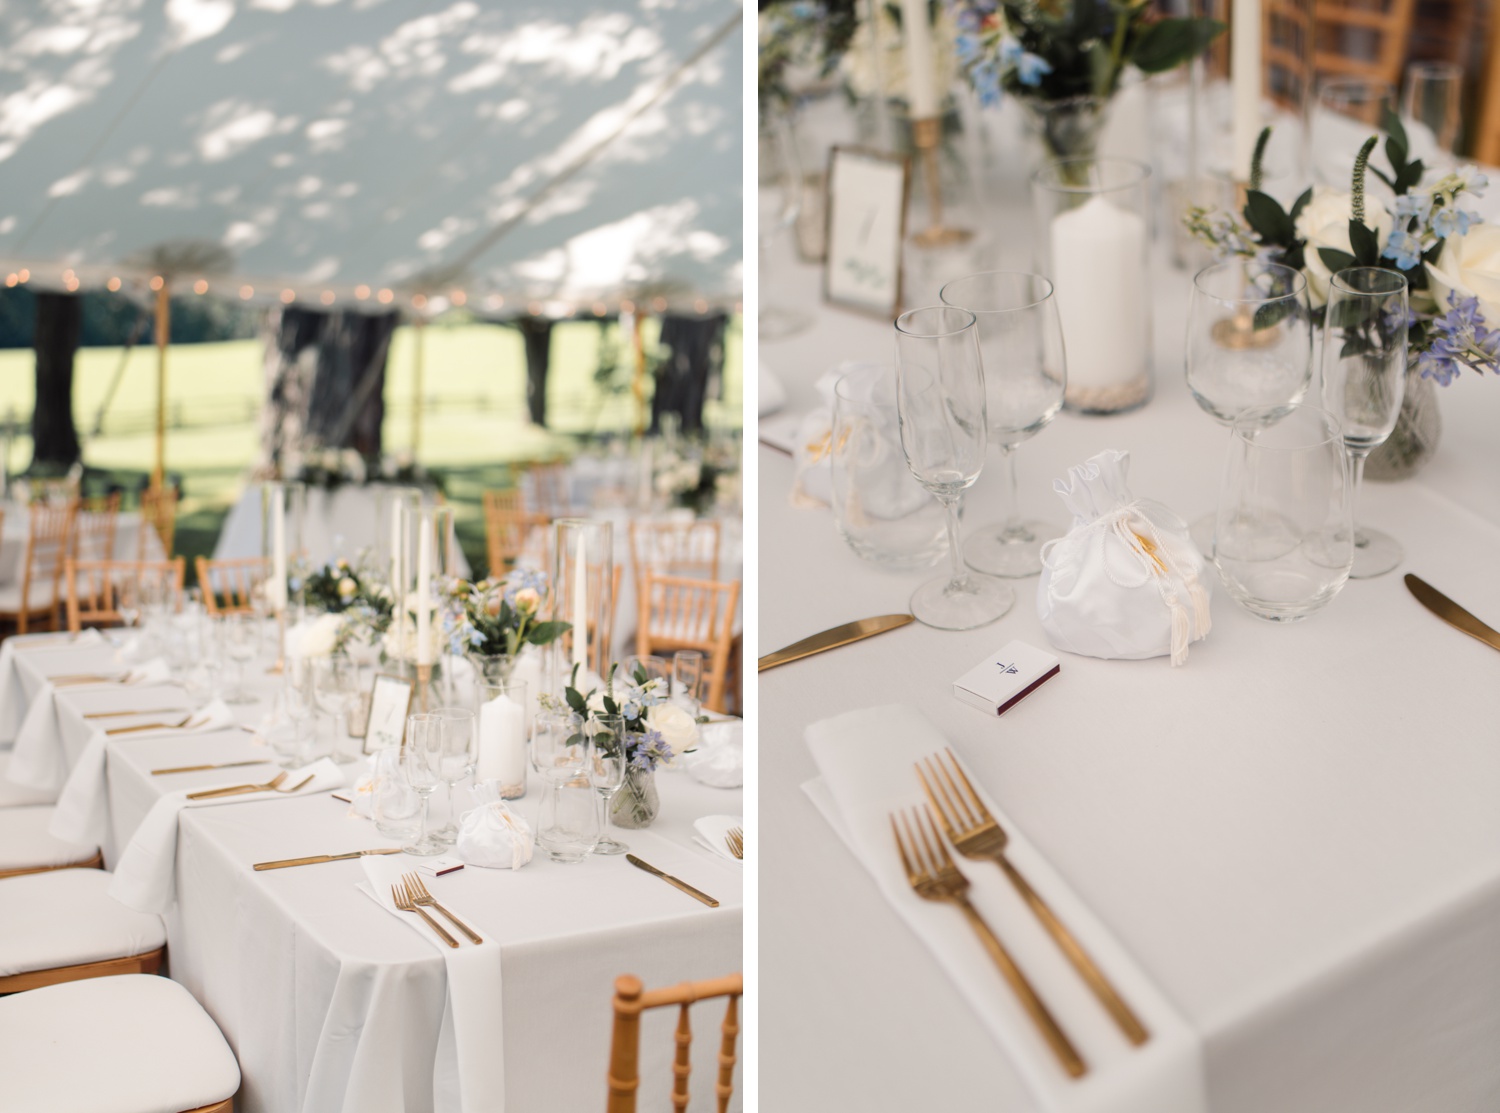 White table linens, gold cutlery, blue and white florals, and white taper candles for a summer tented wedding reception